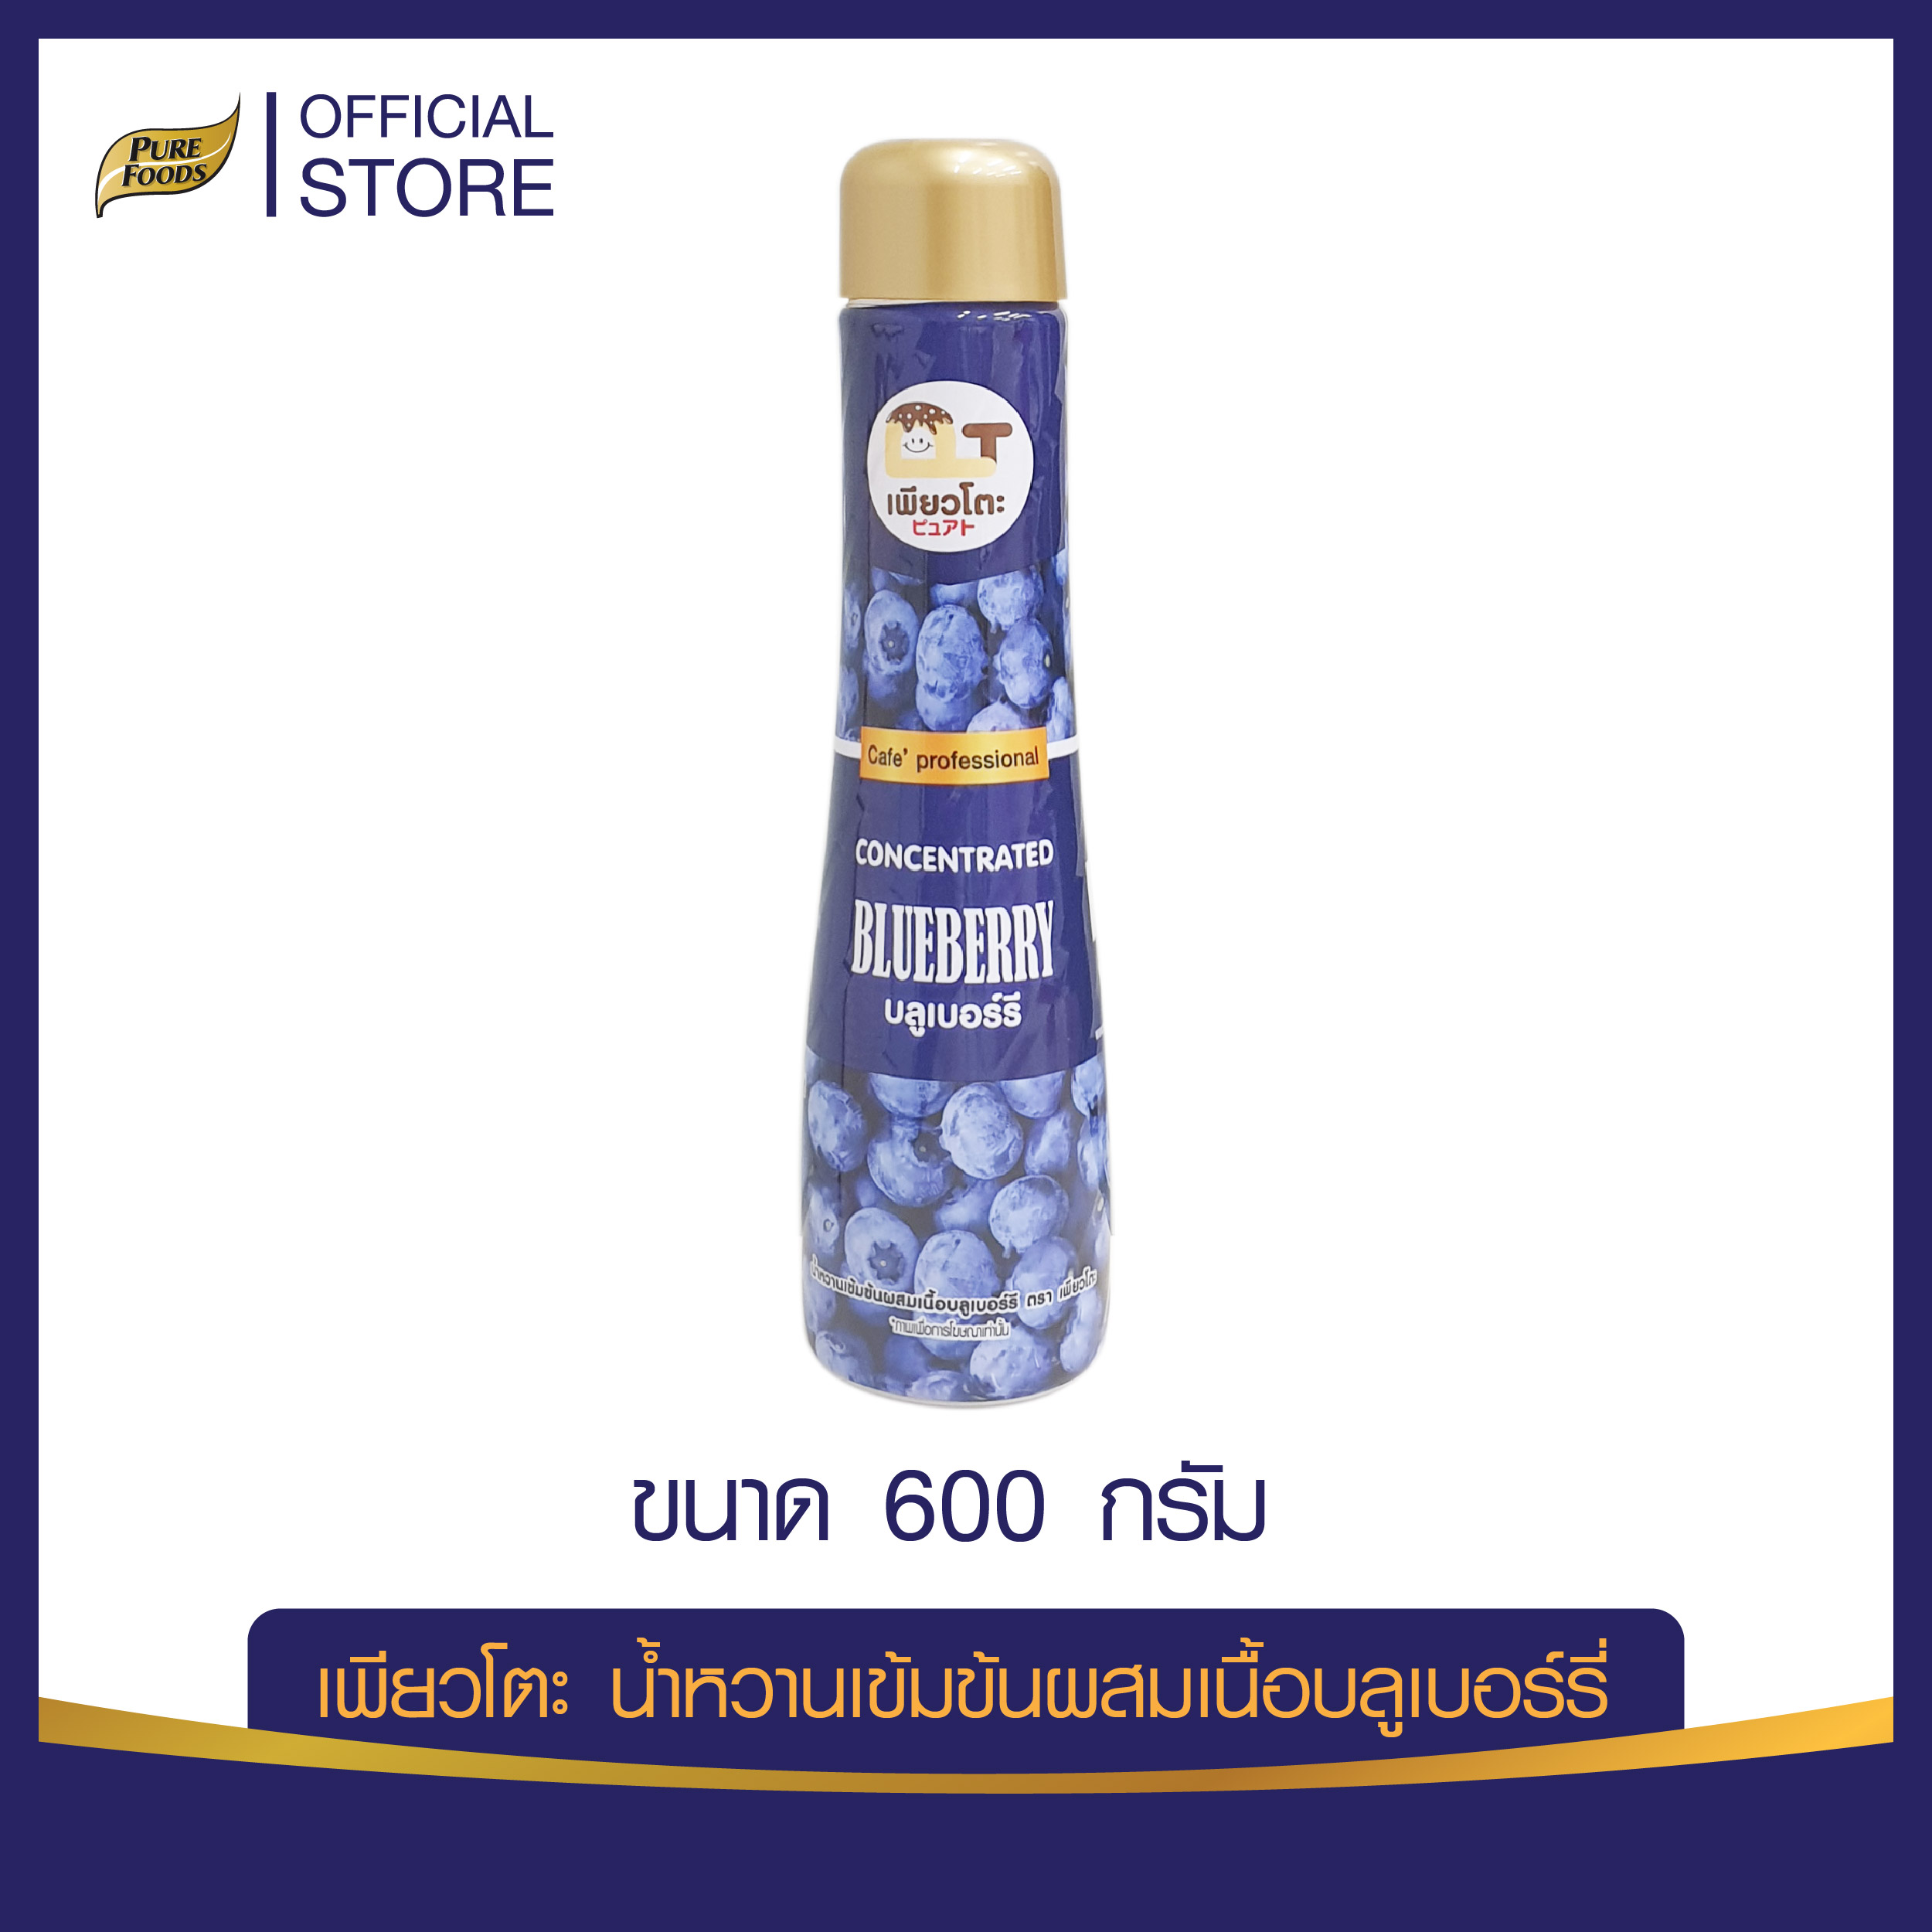 Concentrated nectar Blueberry flavor Pureto brand, size 600g.